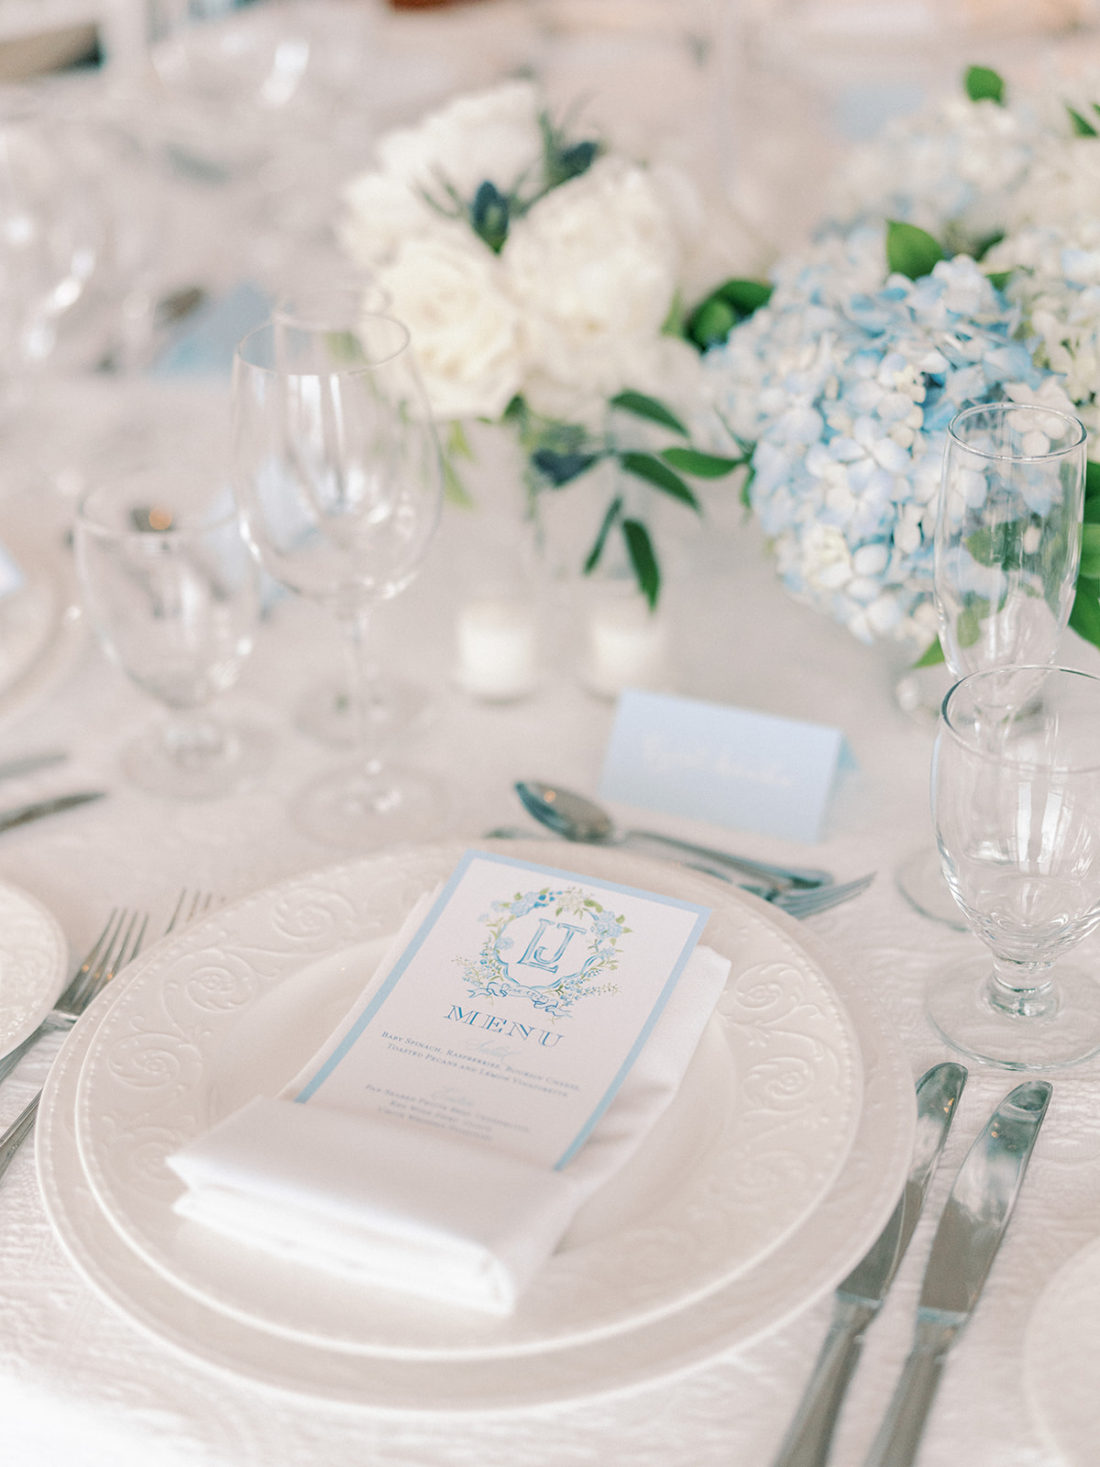 Wedding Crest, Tablescape, Parties, Wedding Ideas, Wedding Table, Table Inspiration